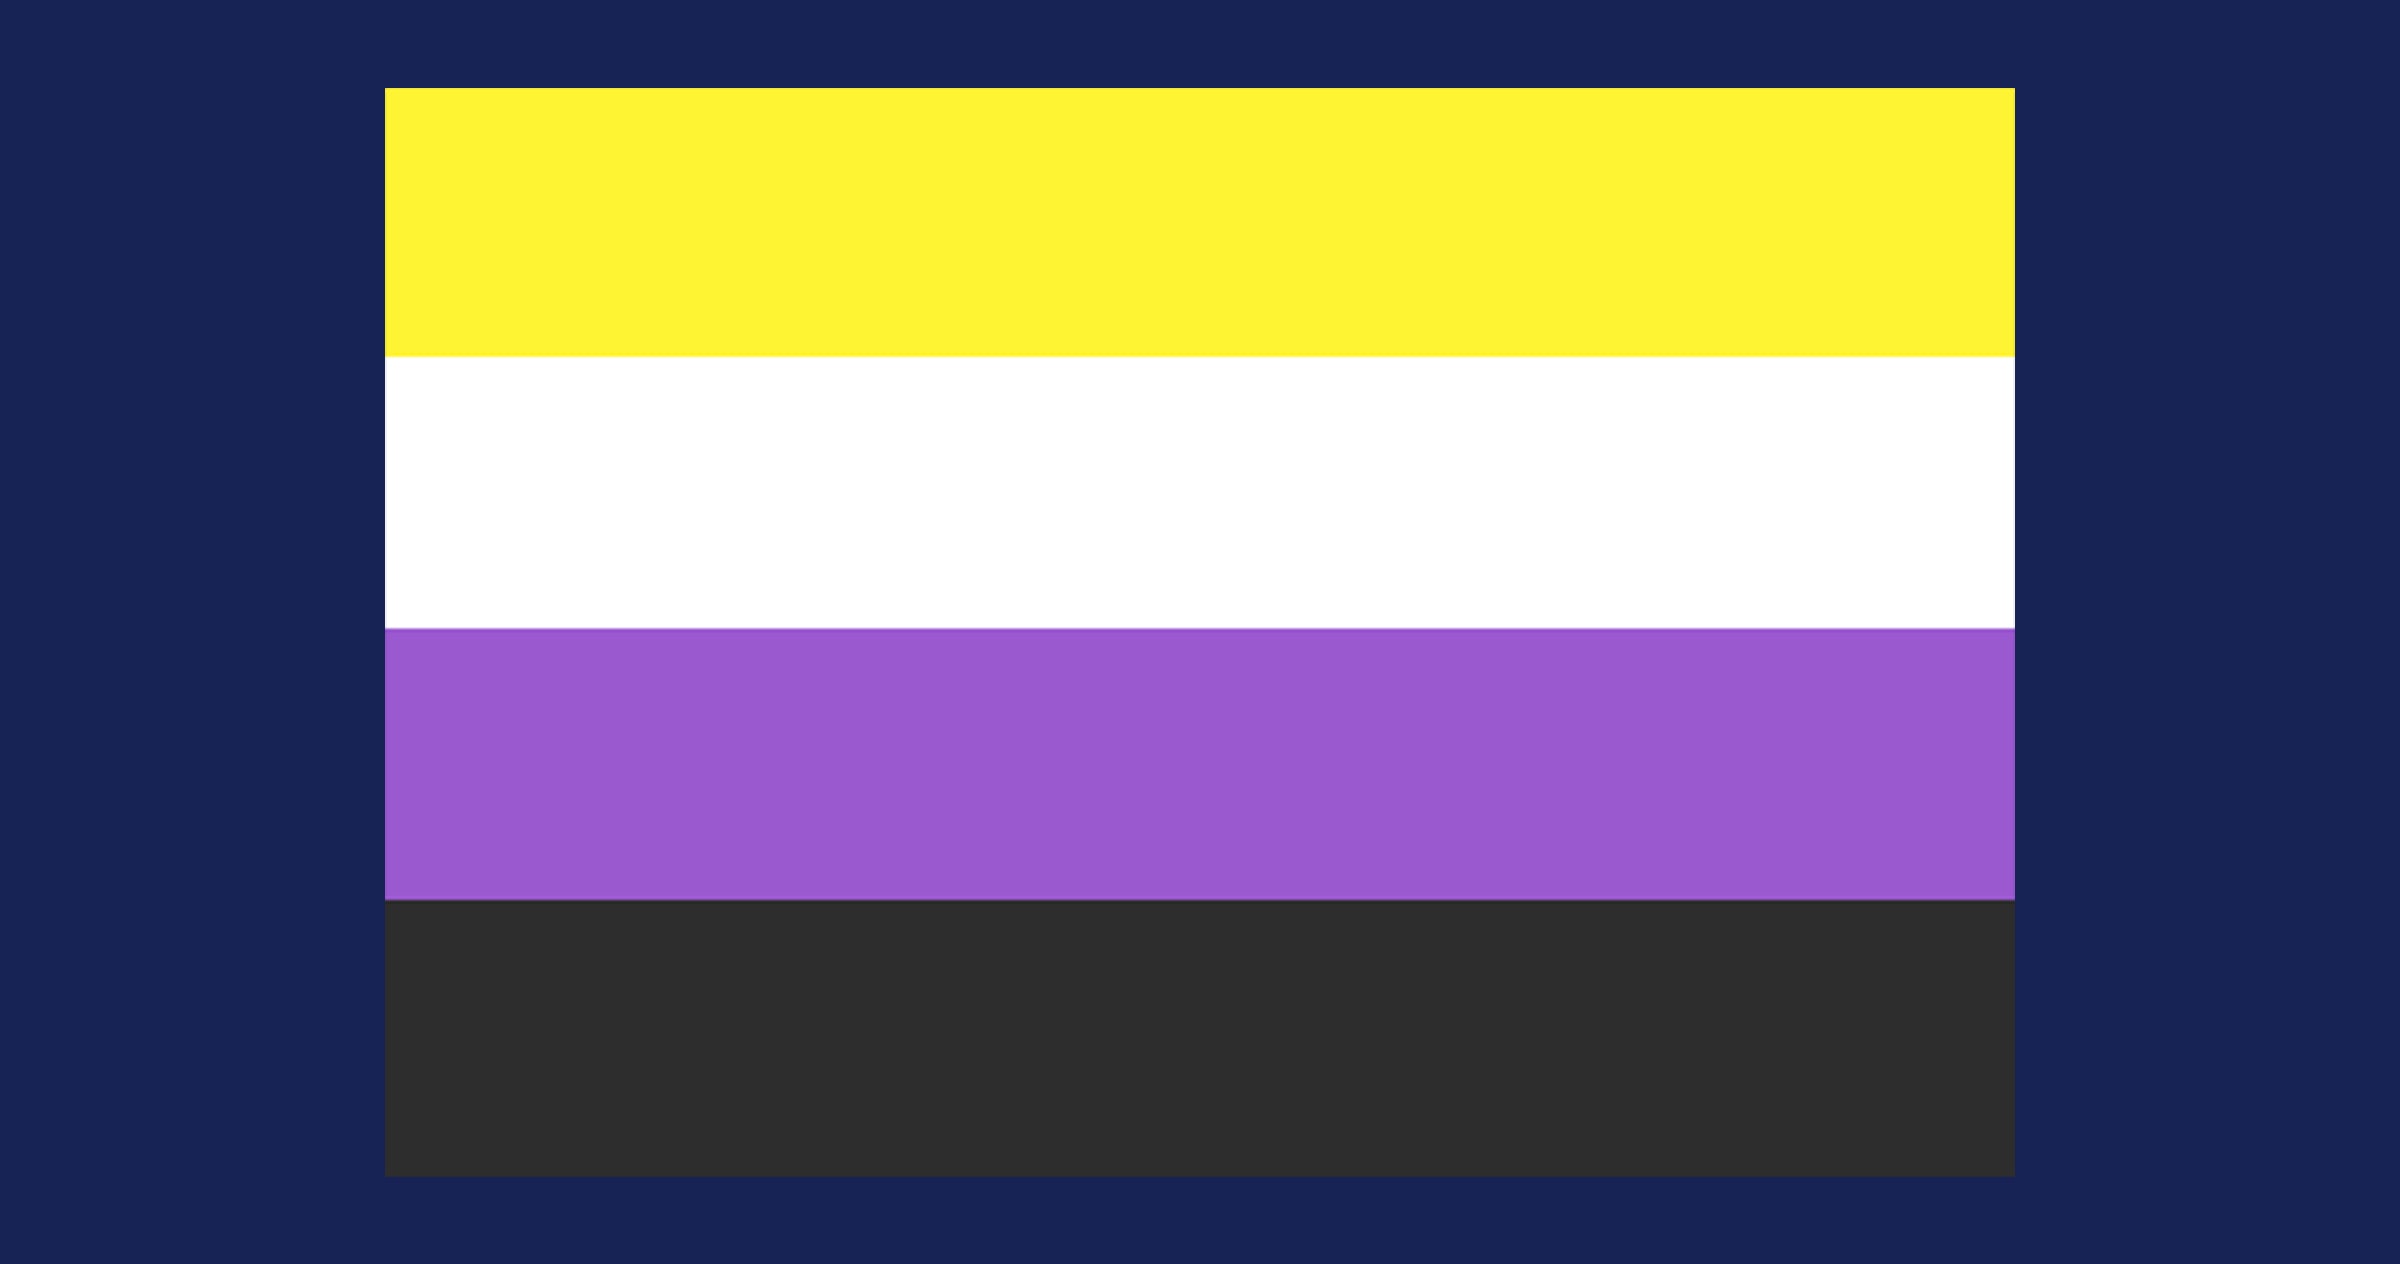 When is Non-Binary People's Day 2023 and what does it mean?